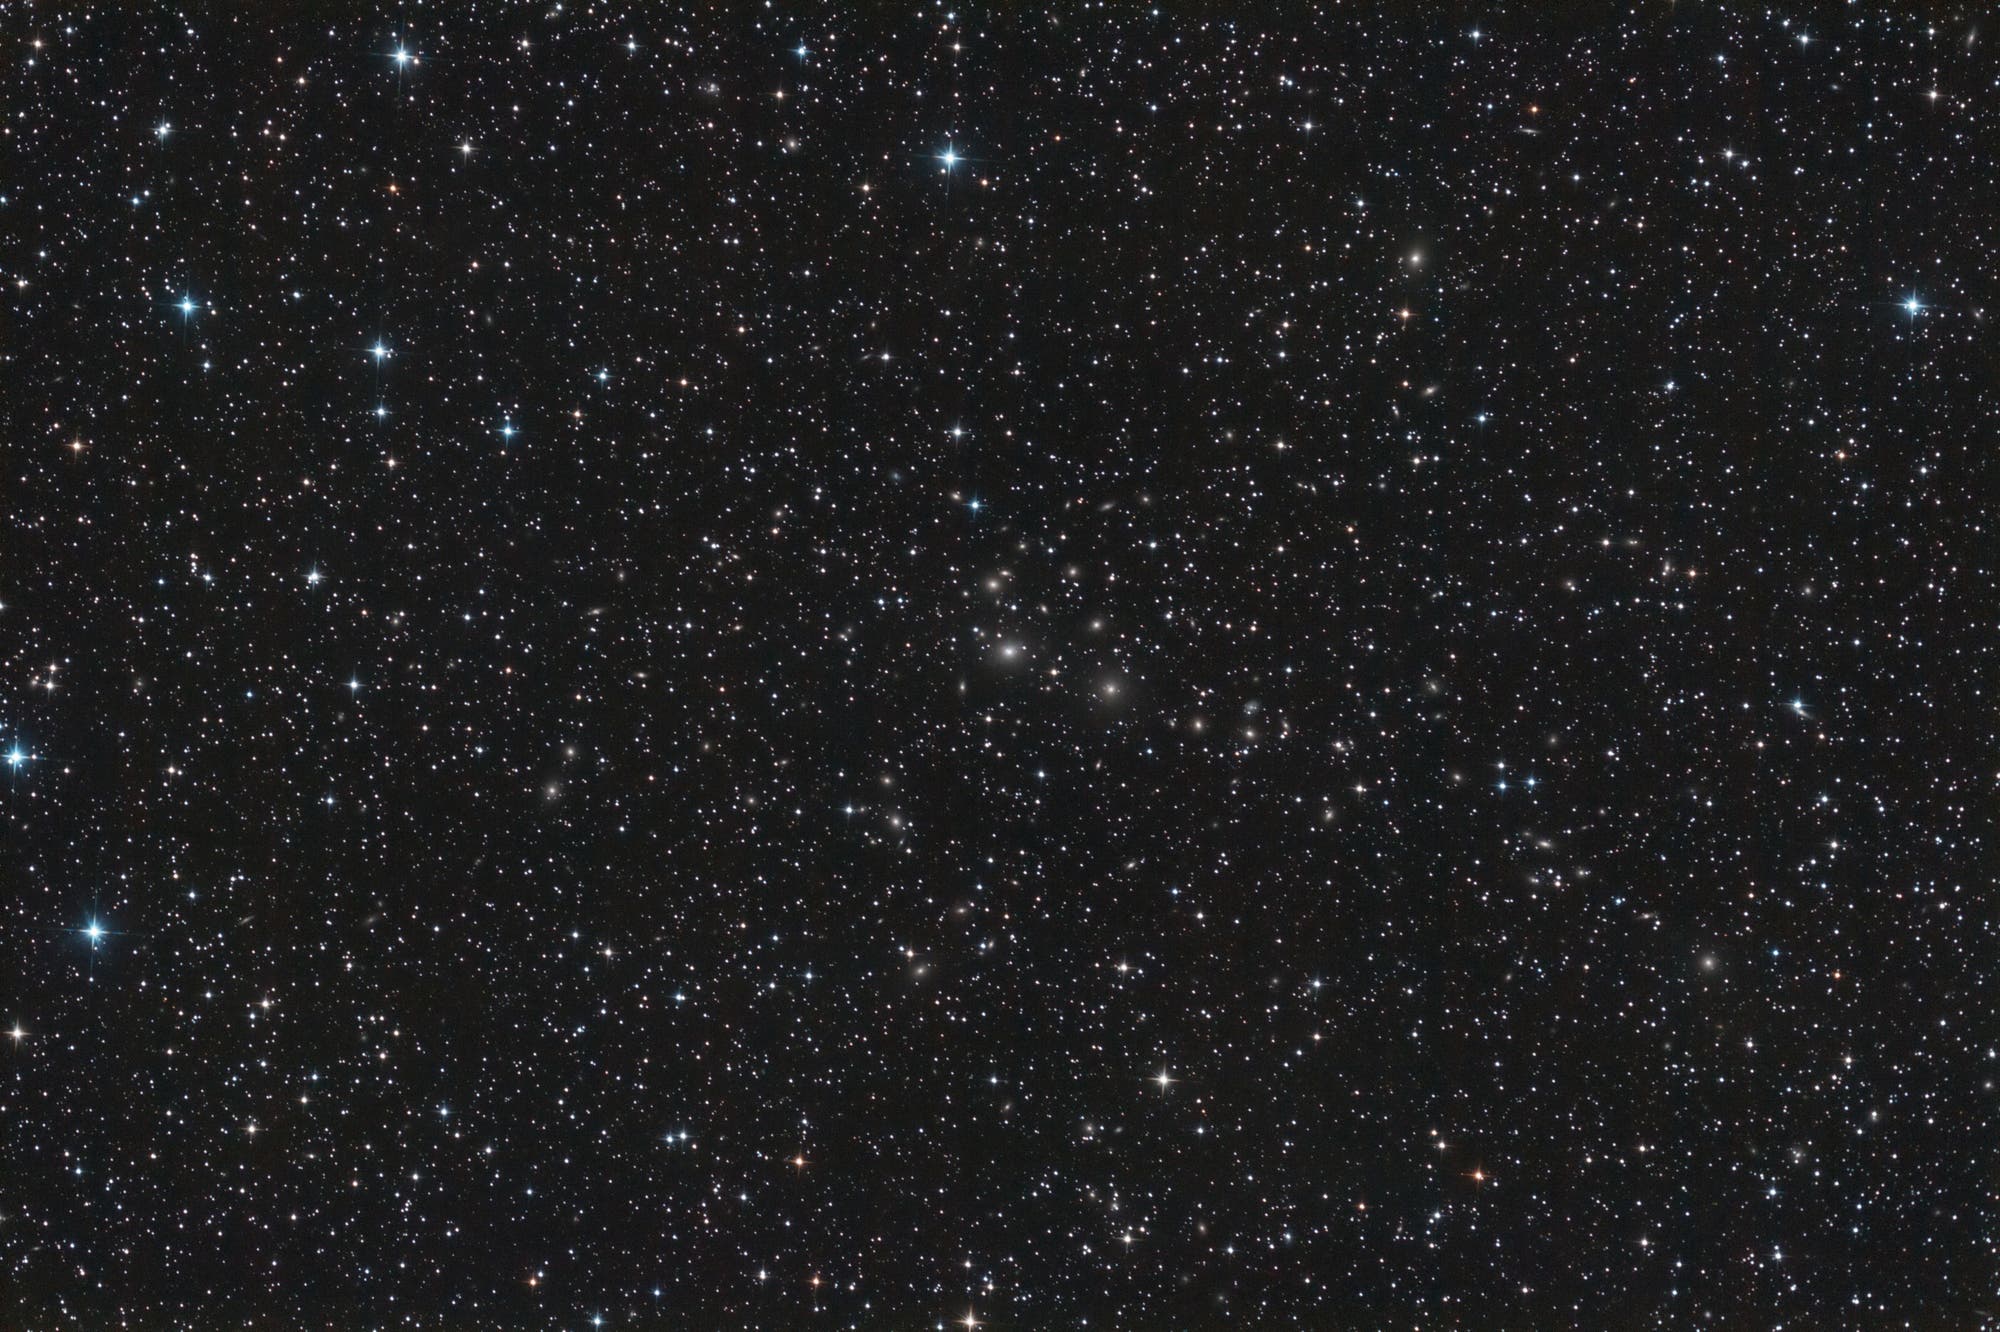 Perseus Cluster - Abell 426